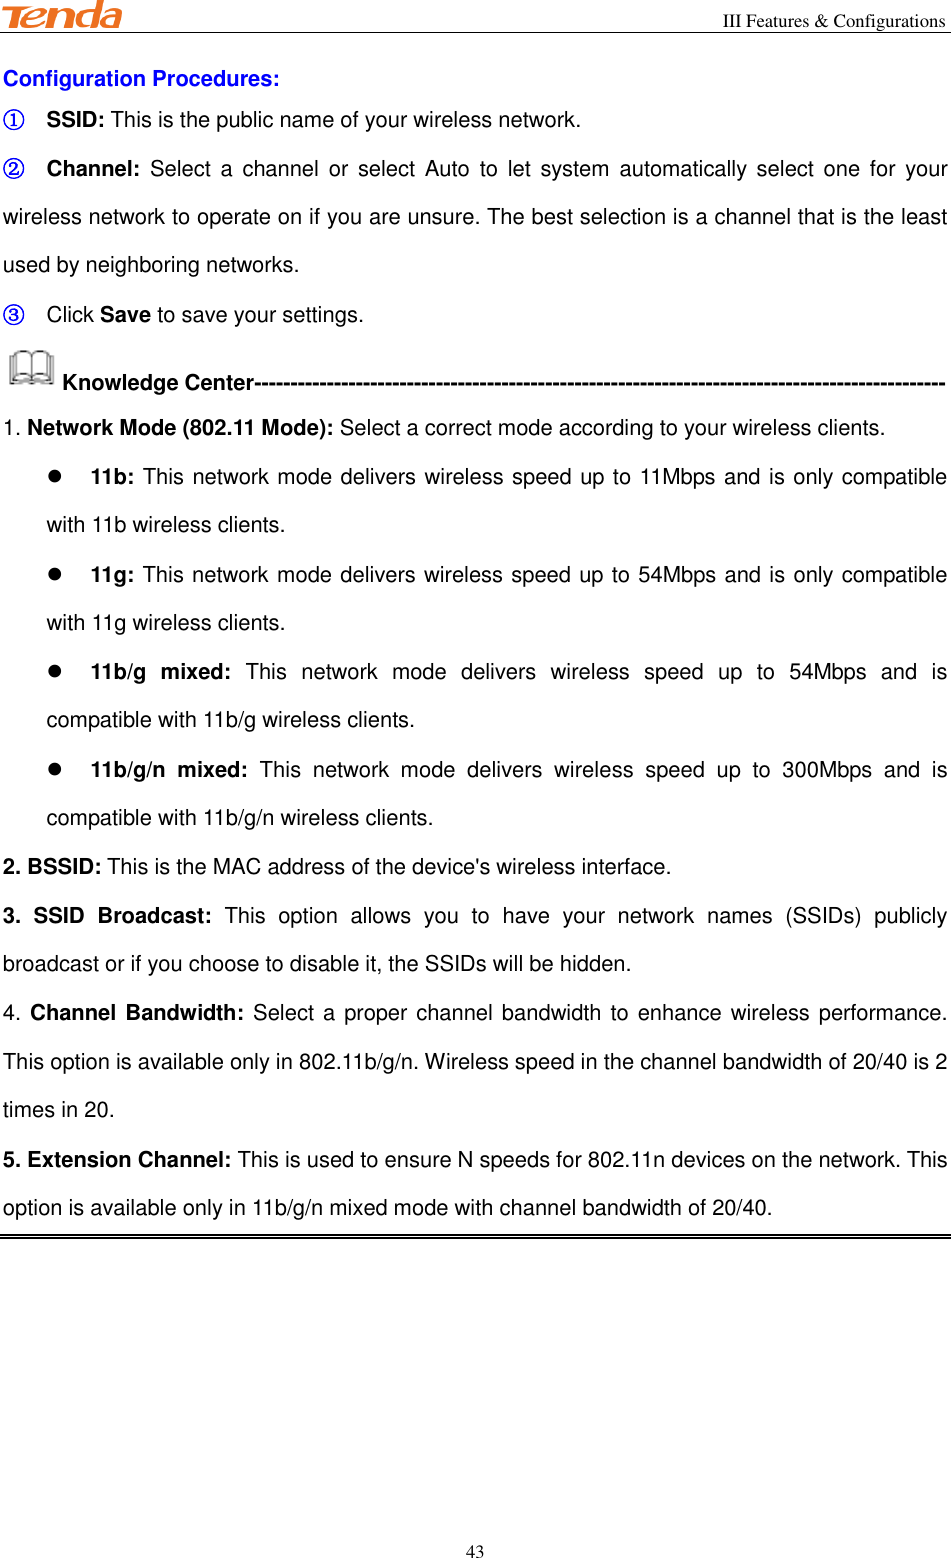                                                        III Features &amp; Configurations           43 Configuration Procedures: ① SSID: This is the public name of your wireless network. ② Channel:  Select  a  channel or select Auto  to  let  system automatically  select one  for  your wireless network to operate on if you are unsure. The best selection is a channel that is the least used by neighboring networks. ③ Click Save to save your settings. Knowledge Center----------------------------------------------------------------------------------------------- 1. Network Mode (802.11 Mode): Select a correct mode according to your wireless clients.  11b: This network mode delivers wireless speed up to 11Mbps and is only compatible with 11b wireless clients.  11g: This network mode delivers wireless speed up to 54Mbps and is only compatible with 11g wireless clients.  11b/g  mixed:  This  network  mode  delivers  wireless  speed  up  to  54Mbps  and  is compatible with 11b/g wireless clients.  11b/g/n  mixed:  This  network  mode  delivers  wireless  speed  up  to  300Mbps  and  is compatible with 11b/g/n wireless clients. 2. BSSID: This is the MAC address of the device&apos;s wireless interface.   3.  SSID  Broadcast:  This  option  allows  you  to  have  your  network  names  (SSIDs)  publicly broadcast or if you choose to disable it, the SSIDs will be hidden. 4. Channel Bandwidth: Select a proper channel bandwidth to enhance wireless performance. This option is available only in 802.11b/g/n. Wireless speed in the channel bandwidth of 20/40 is 2 times in 20. 5. Extension Channel: This is used to ensure N speeds for 802.11n devices on the network. This option is available only in 11b/g/n mixed mode with channel bandwidth of 20/40. 